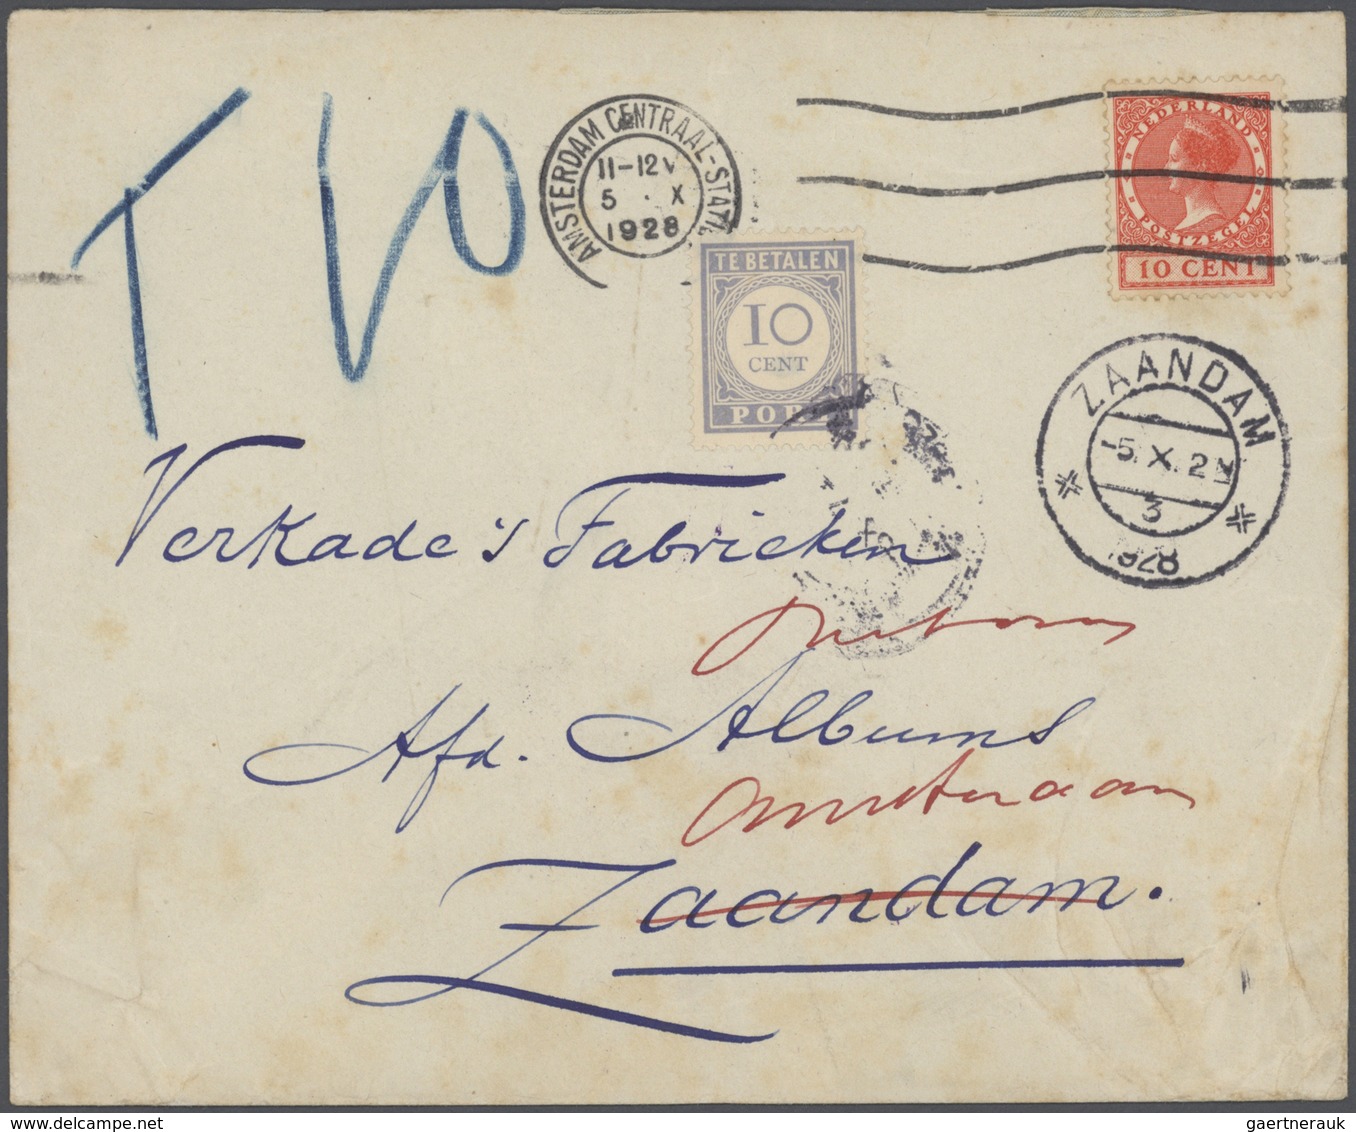 Niederlande: 1877/1957, Netherlands/colonies, holding of apprx. 140 covers/cards/stationeries/ppc wi